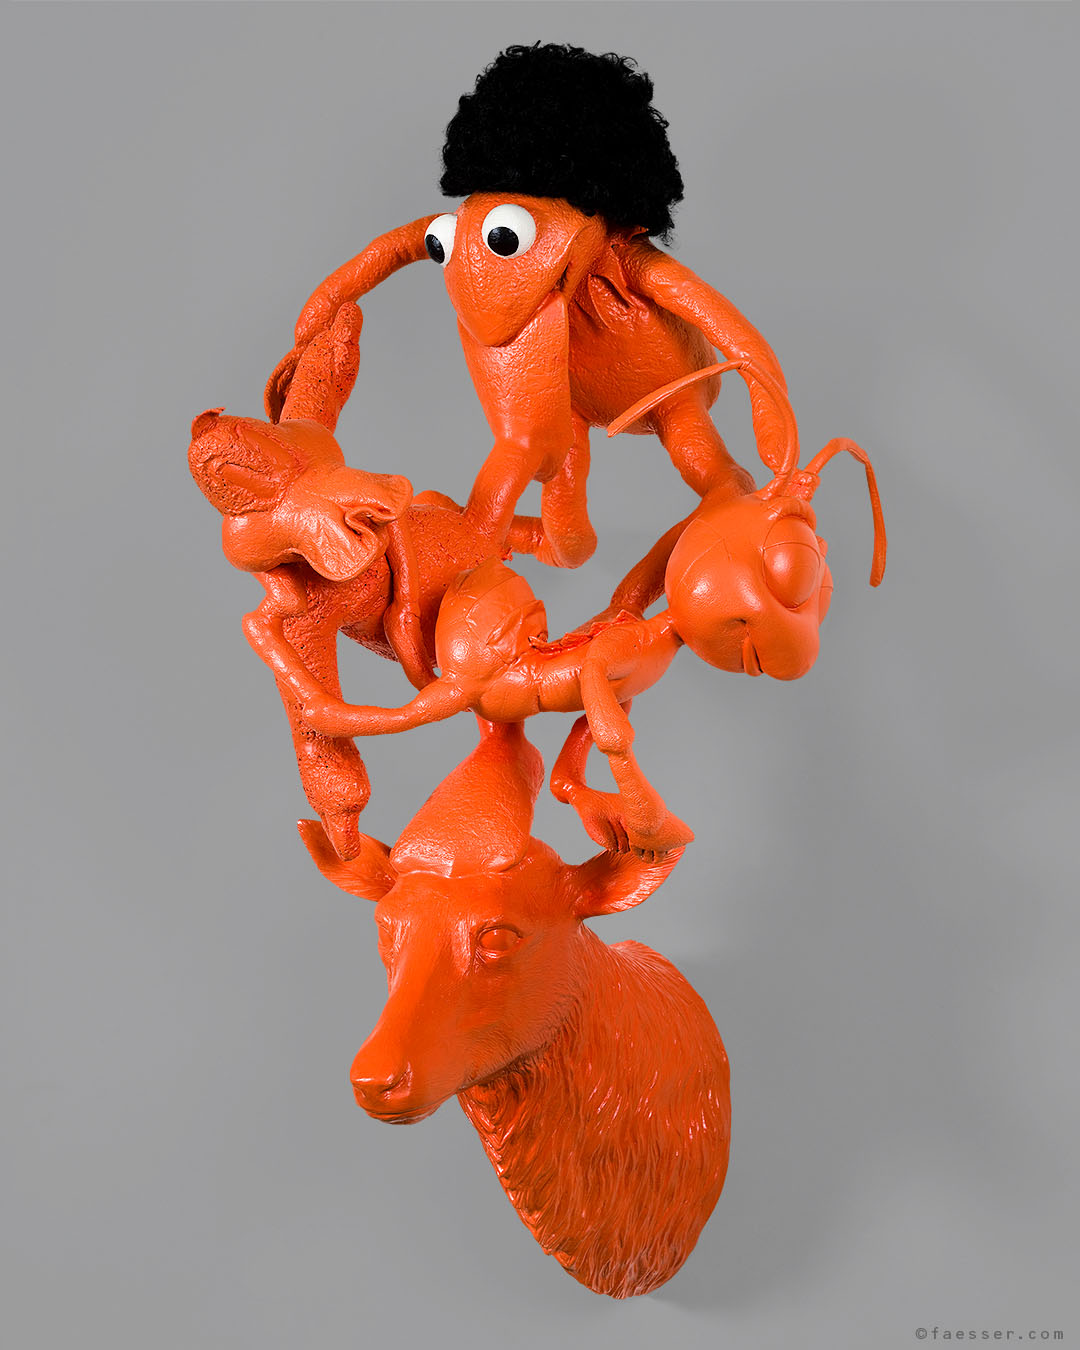 Roberto Blanco, as kermit the frog and friends, united as deer antlers; work of art as figurative sculpture; artist Roland Faesser, sculptor and painter 2008